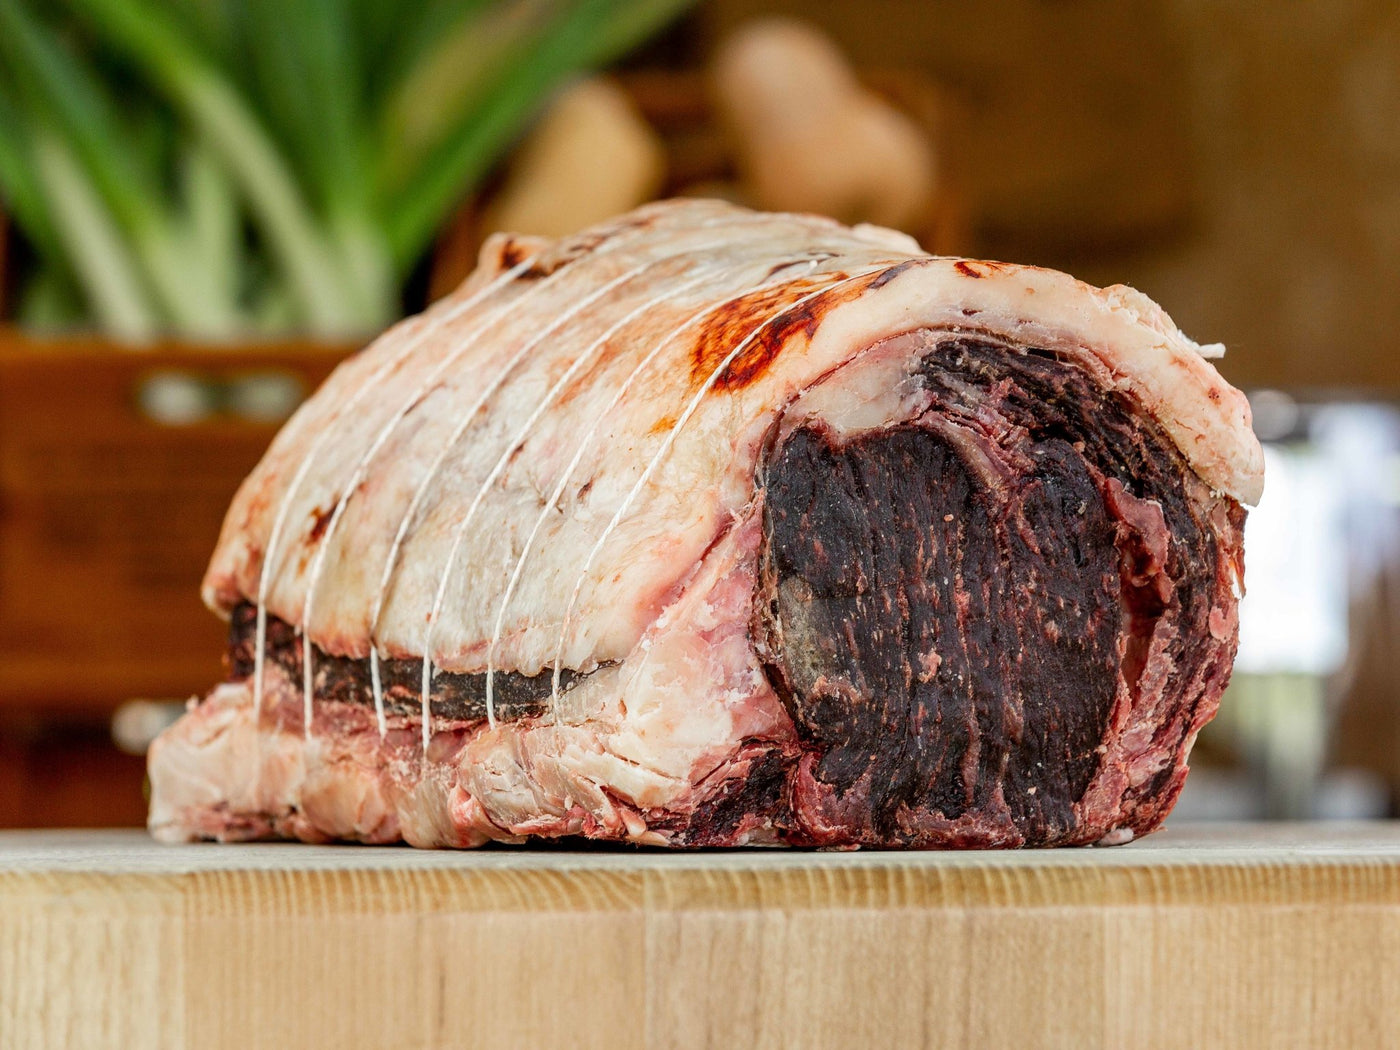 Grass Fed, Dry-Aged Boneless Rolled Rib Of Beef - Beef - Thomas Joseph Butchery - Ethical Dry-Aged Meat The Best Steak UK Thomas Joseph Butchery